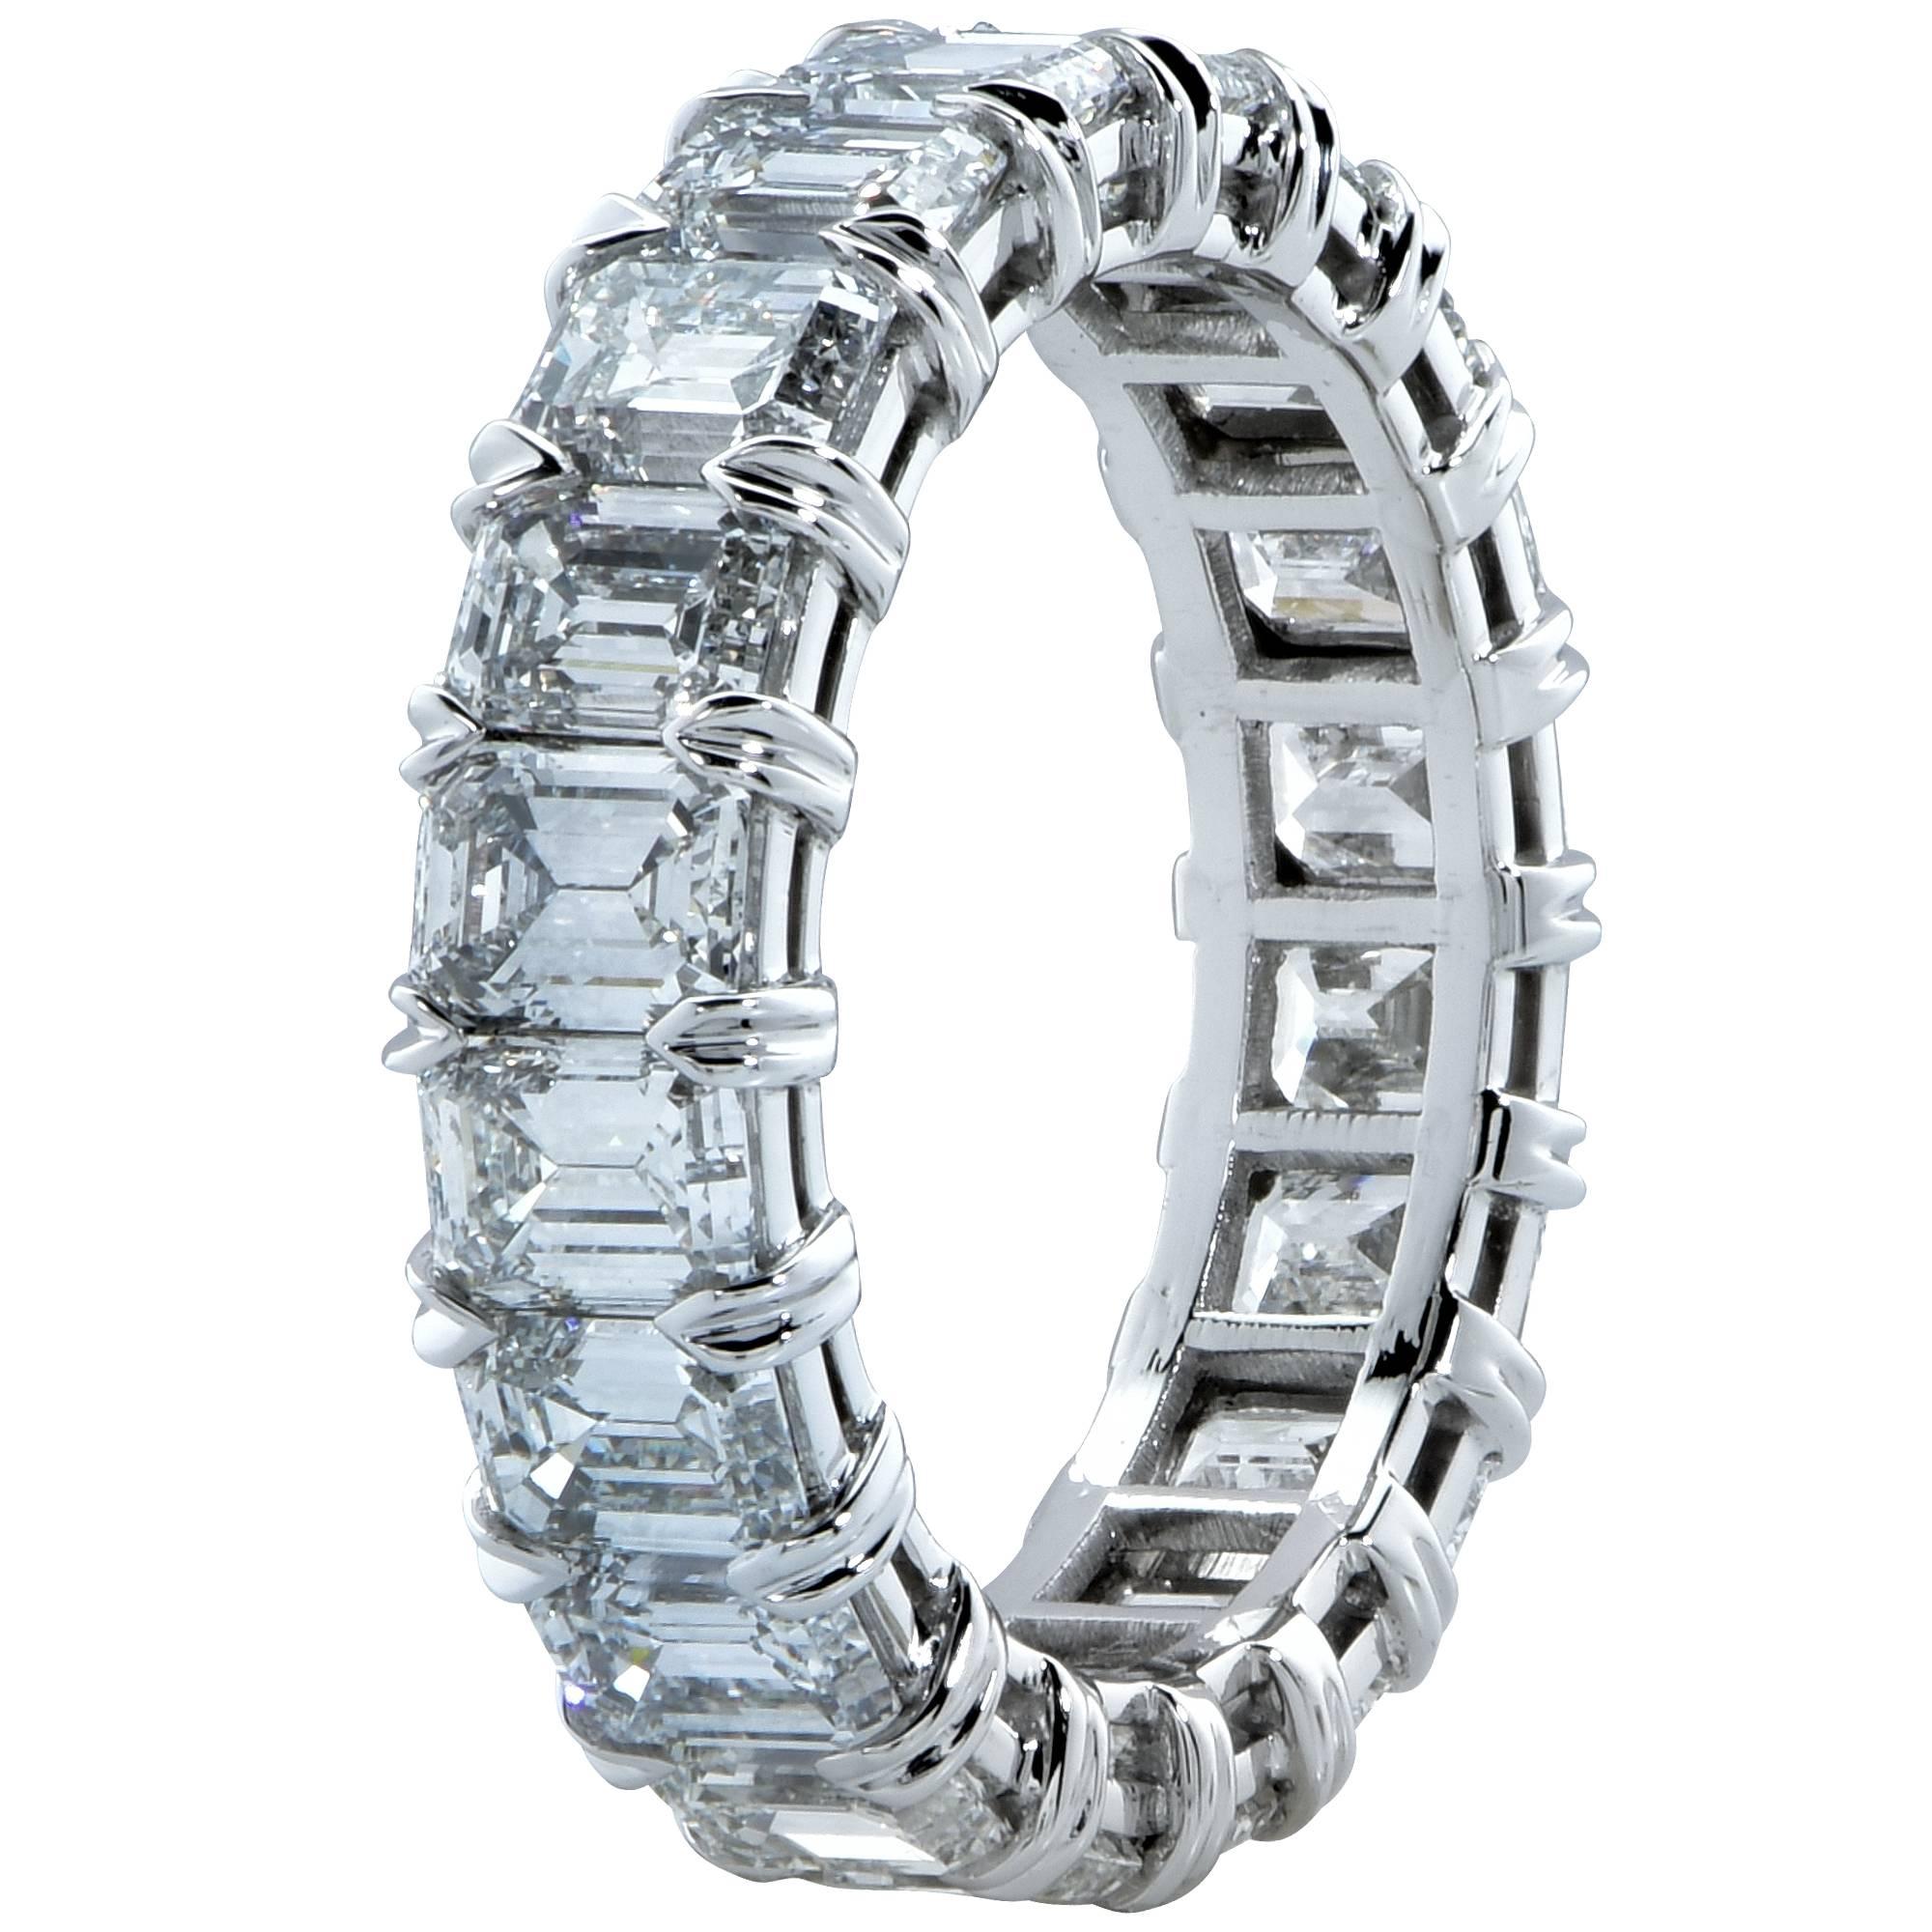 Exquisite Vivid Diamonds eternity band crafted by hand in Platinum, showcasing 20 emerald cut diamonds weighing 5.07 carats total, D-F color, VVS clarity. Each diamond is carefully selected, perfectly matched and set in a seamless sea of eternity